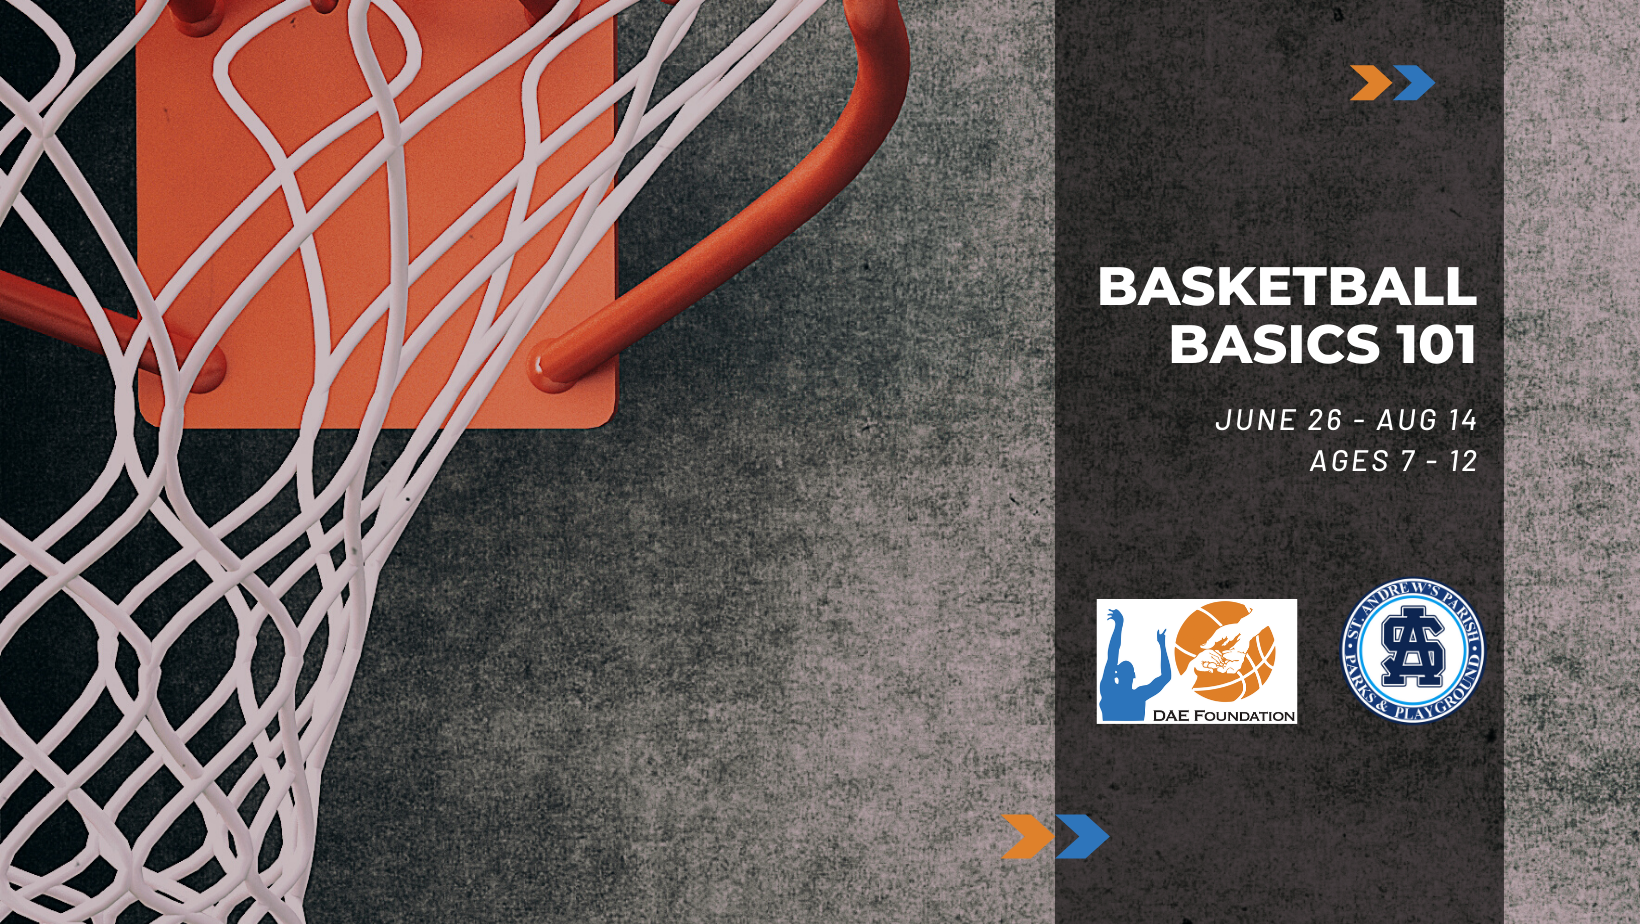 Basketball Basics 101 for Ages 10 to 12 @ St. Andrew's Gymnasium - St. Andrew's Gym Full Court